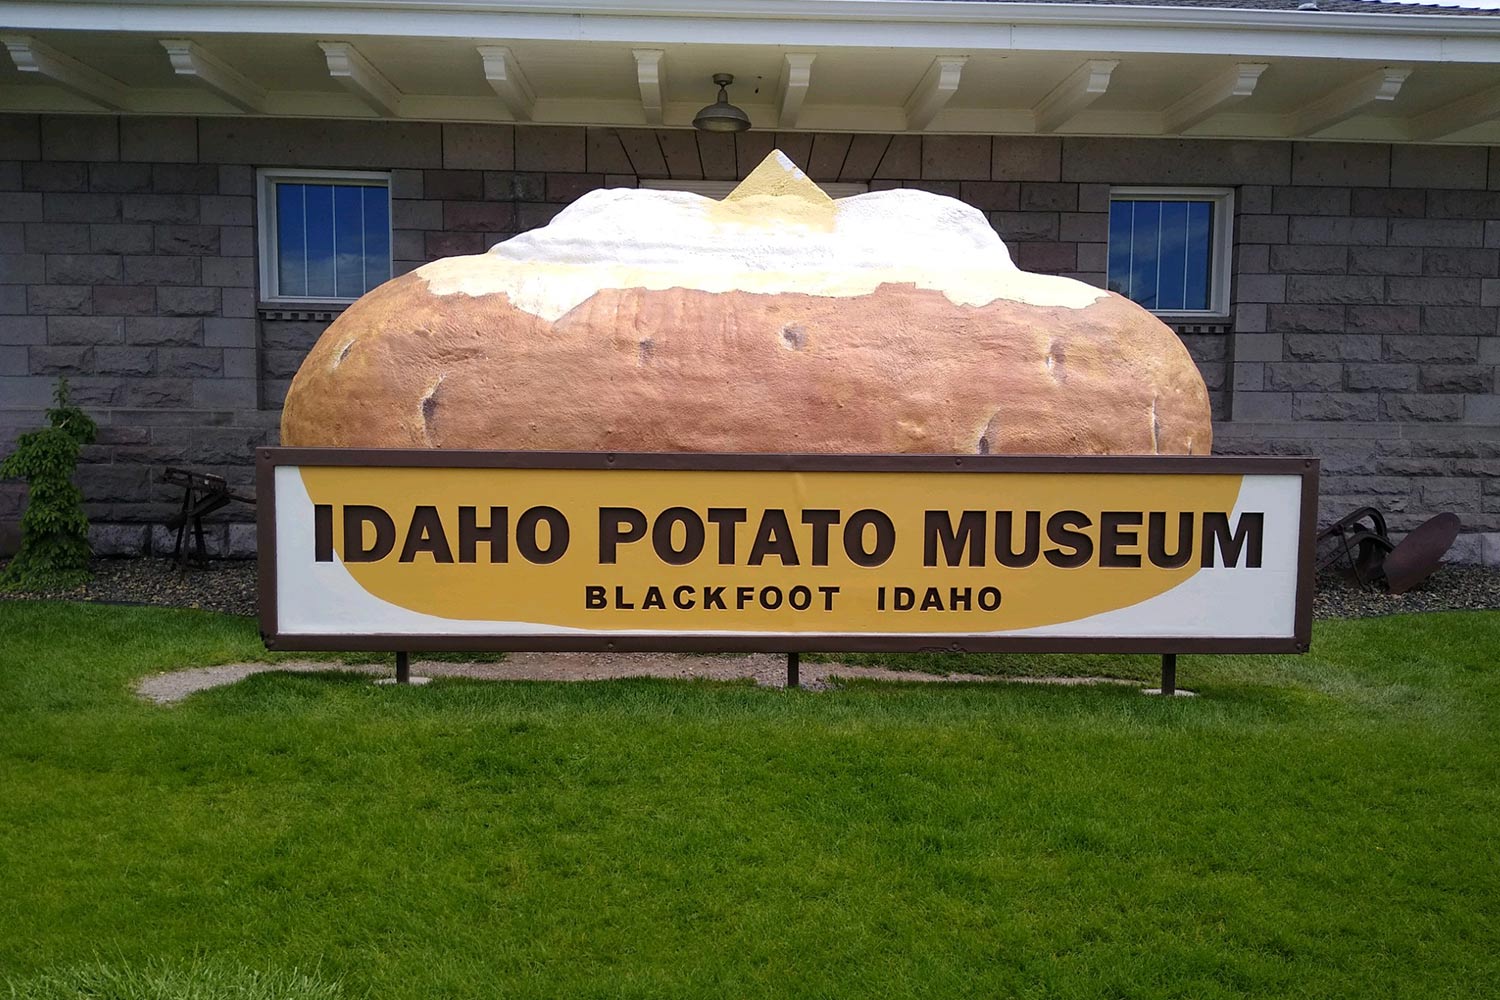 Giant sculpture of baked potato behind the museum sign